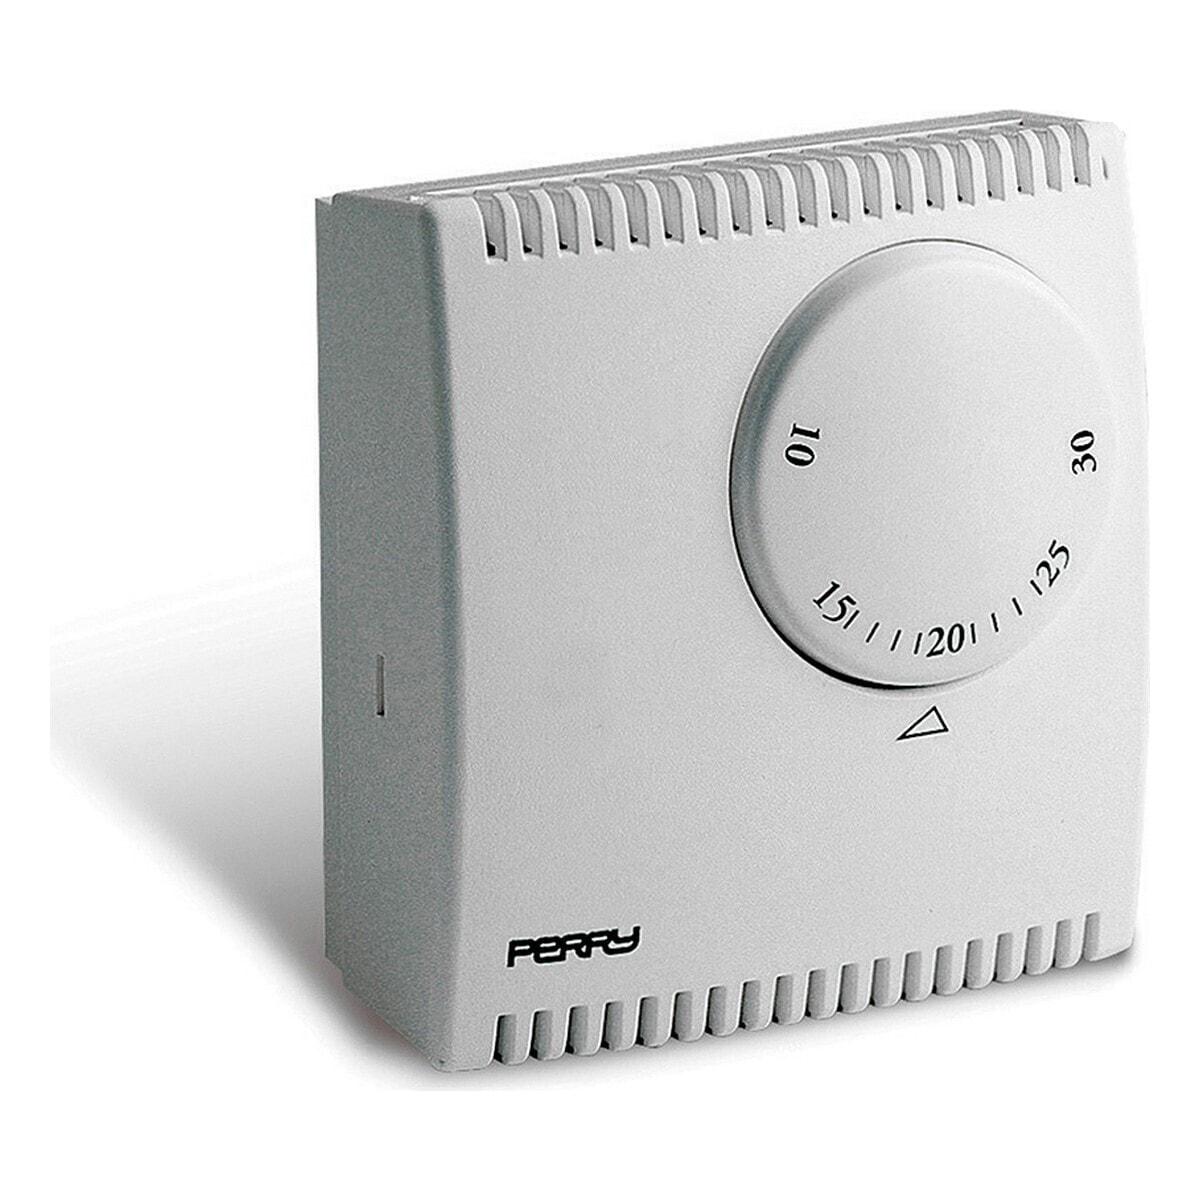 Thermostat Perry 03015 White Analogue